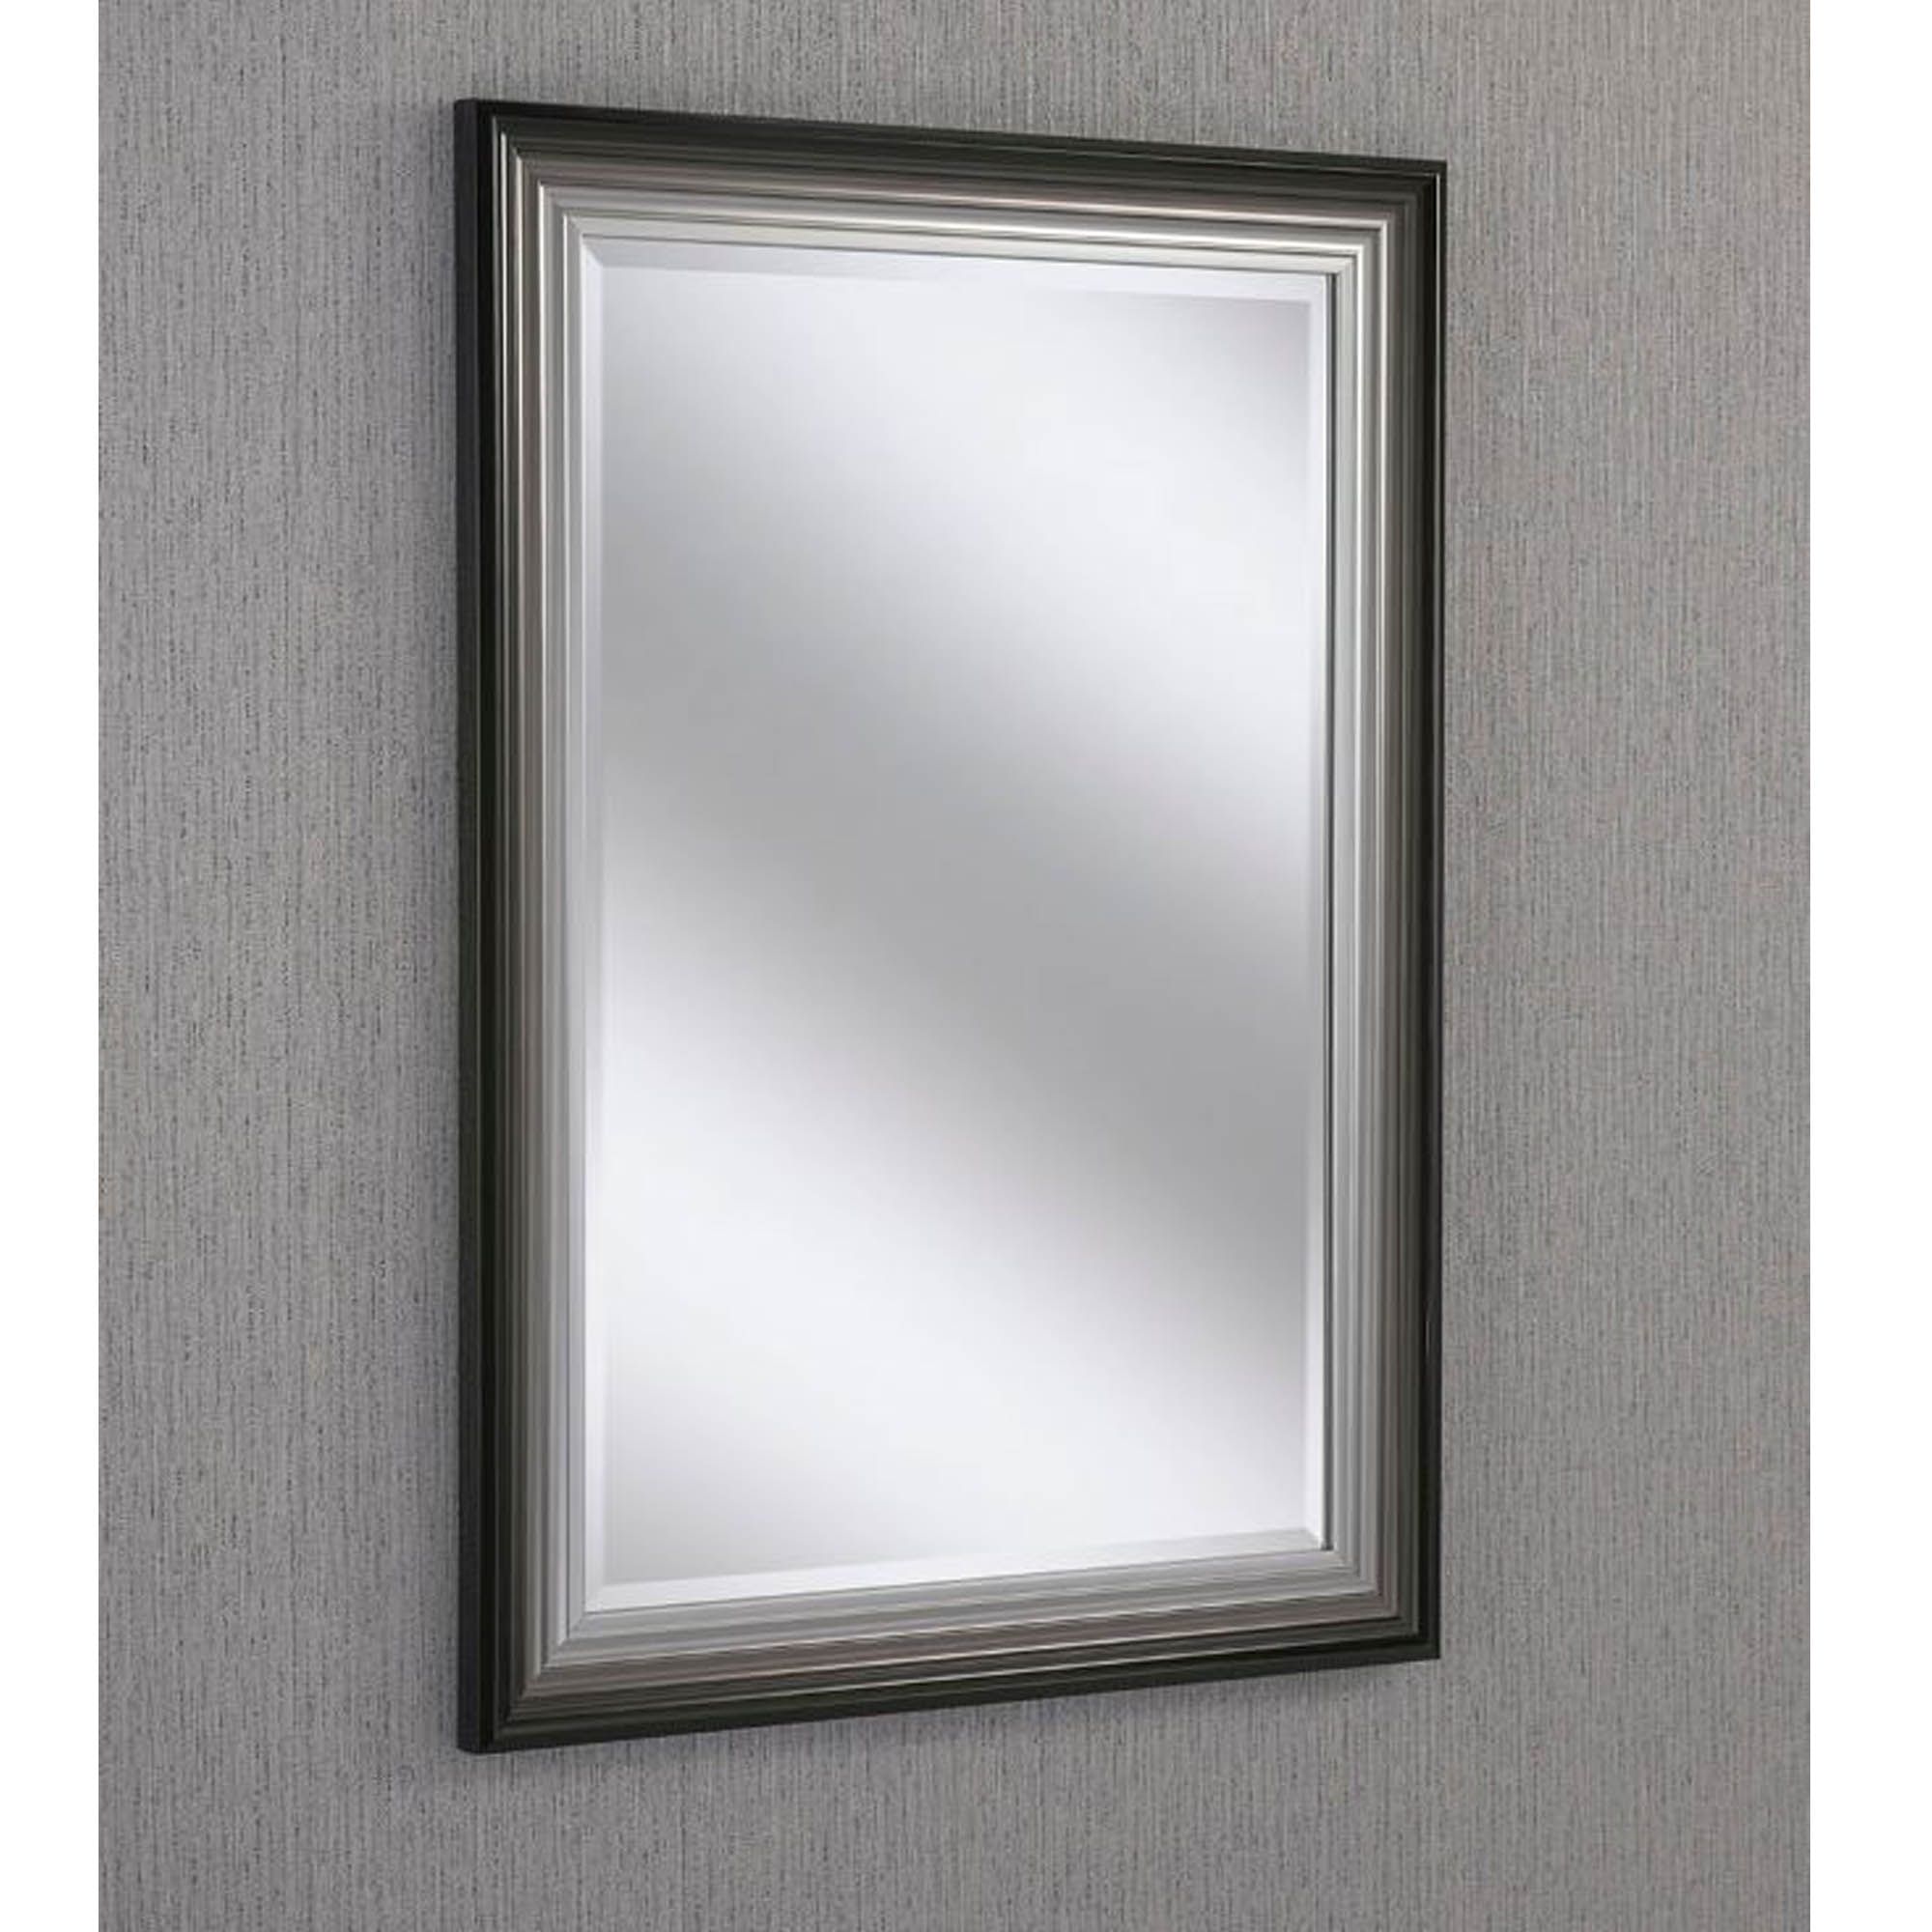 Rectangular Black/silver Beveled Contemporary Wall Mirror | Hd365 Throughout Bevel Edge Rectangular Wall Mirrors (View 7 of 15)